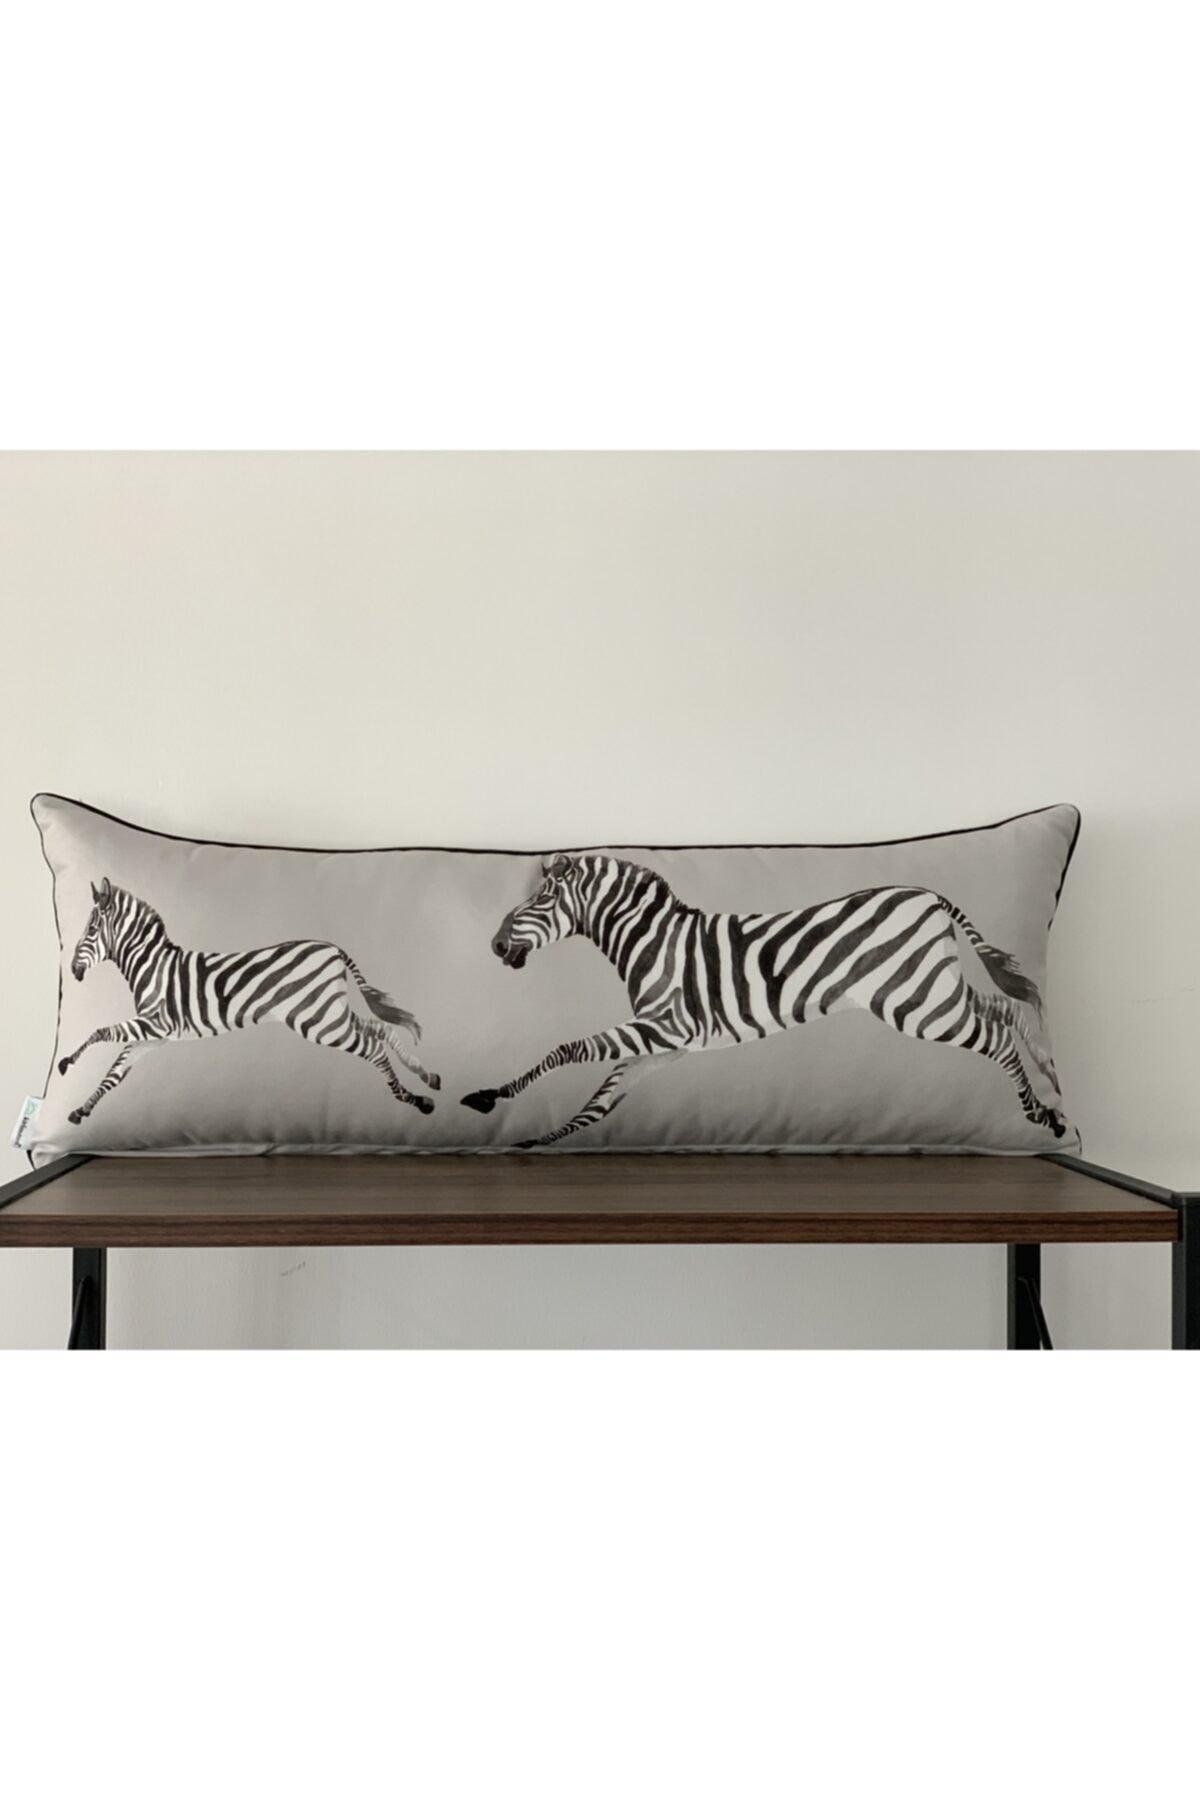 E712 Throw Pillow Cover with Tapered Edges and Patterned on Both Sides - Swordslife